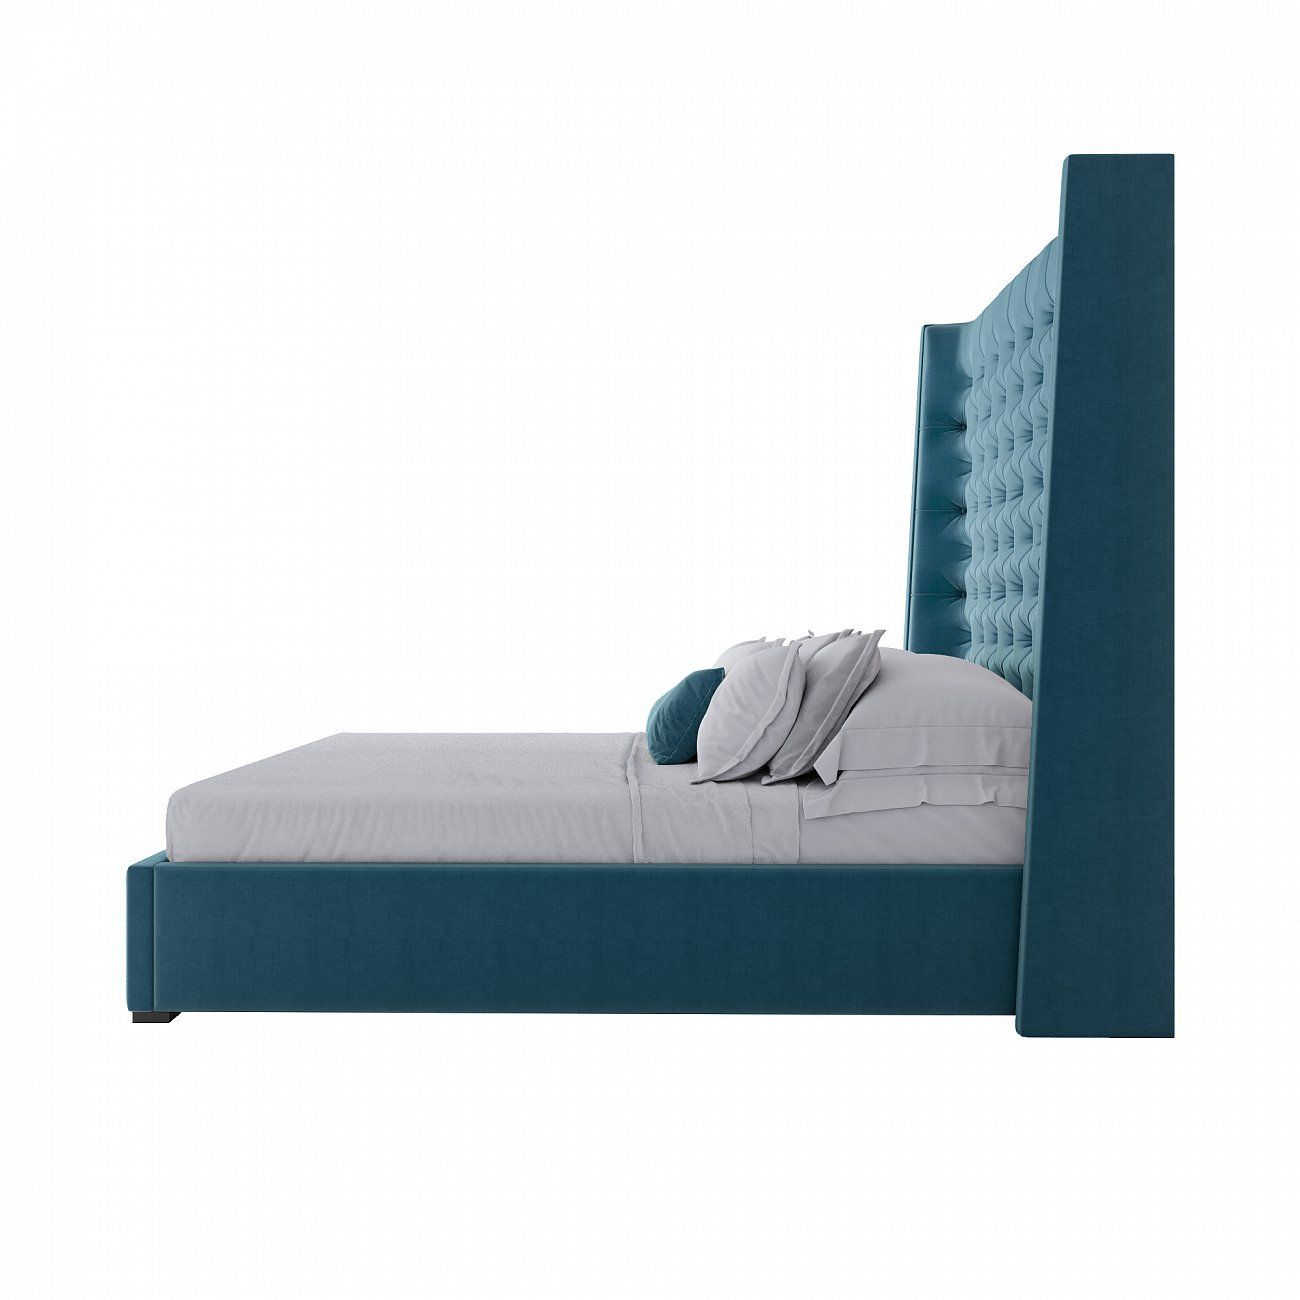 Double bed with upholstered headboard 160x200 cm turquoise Jackie King